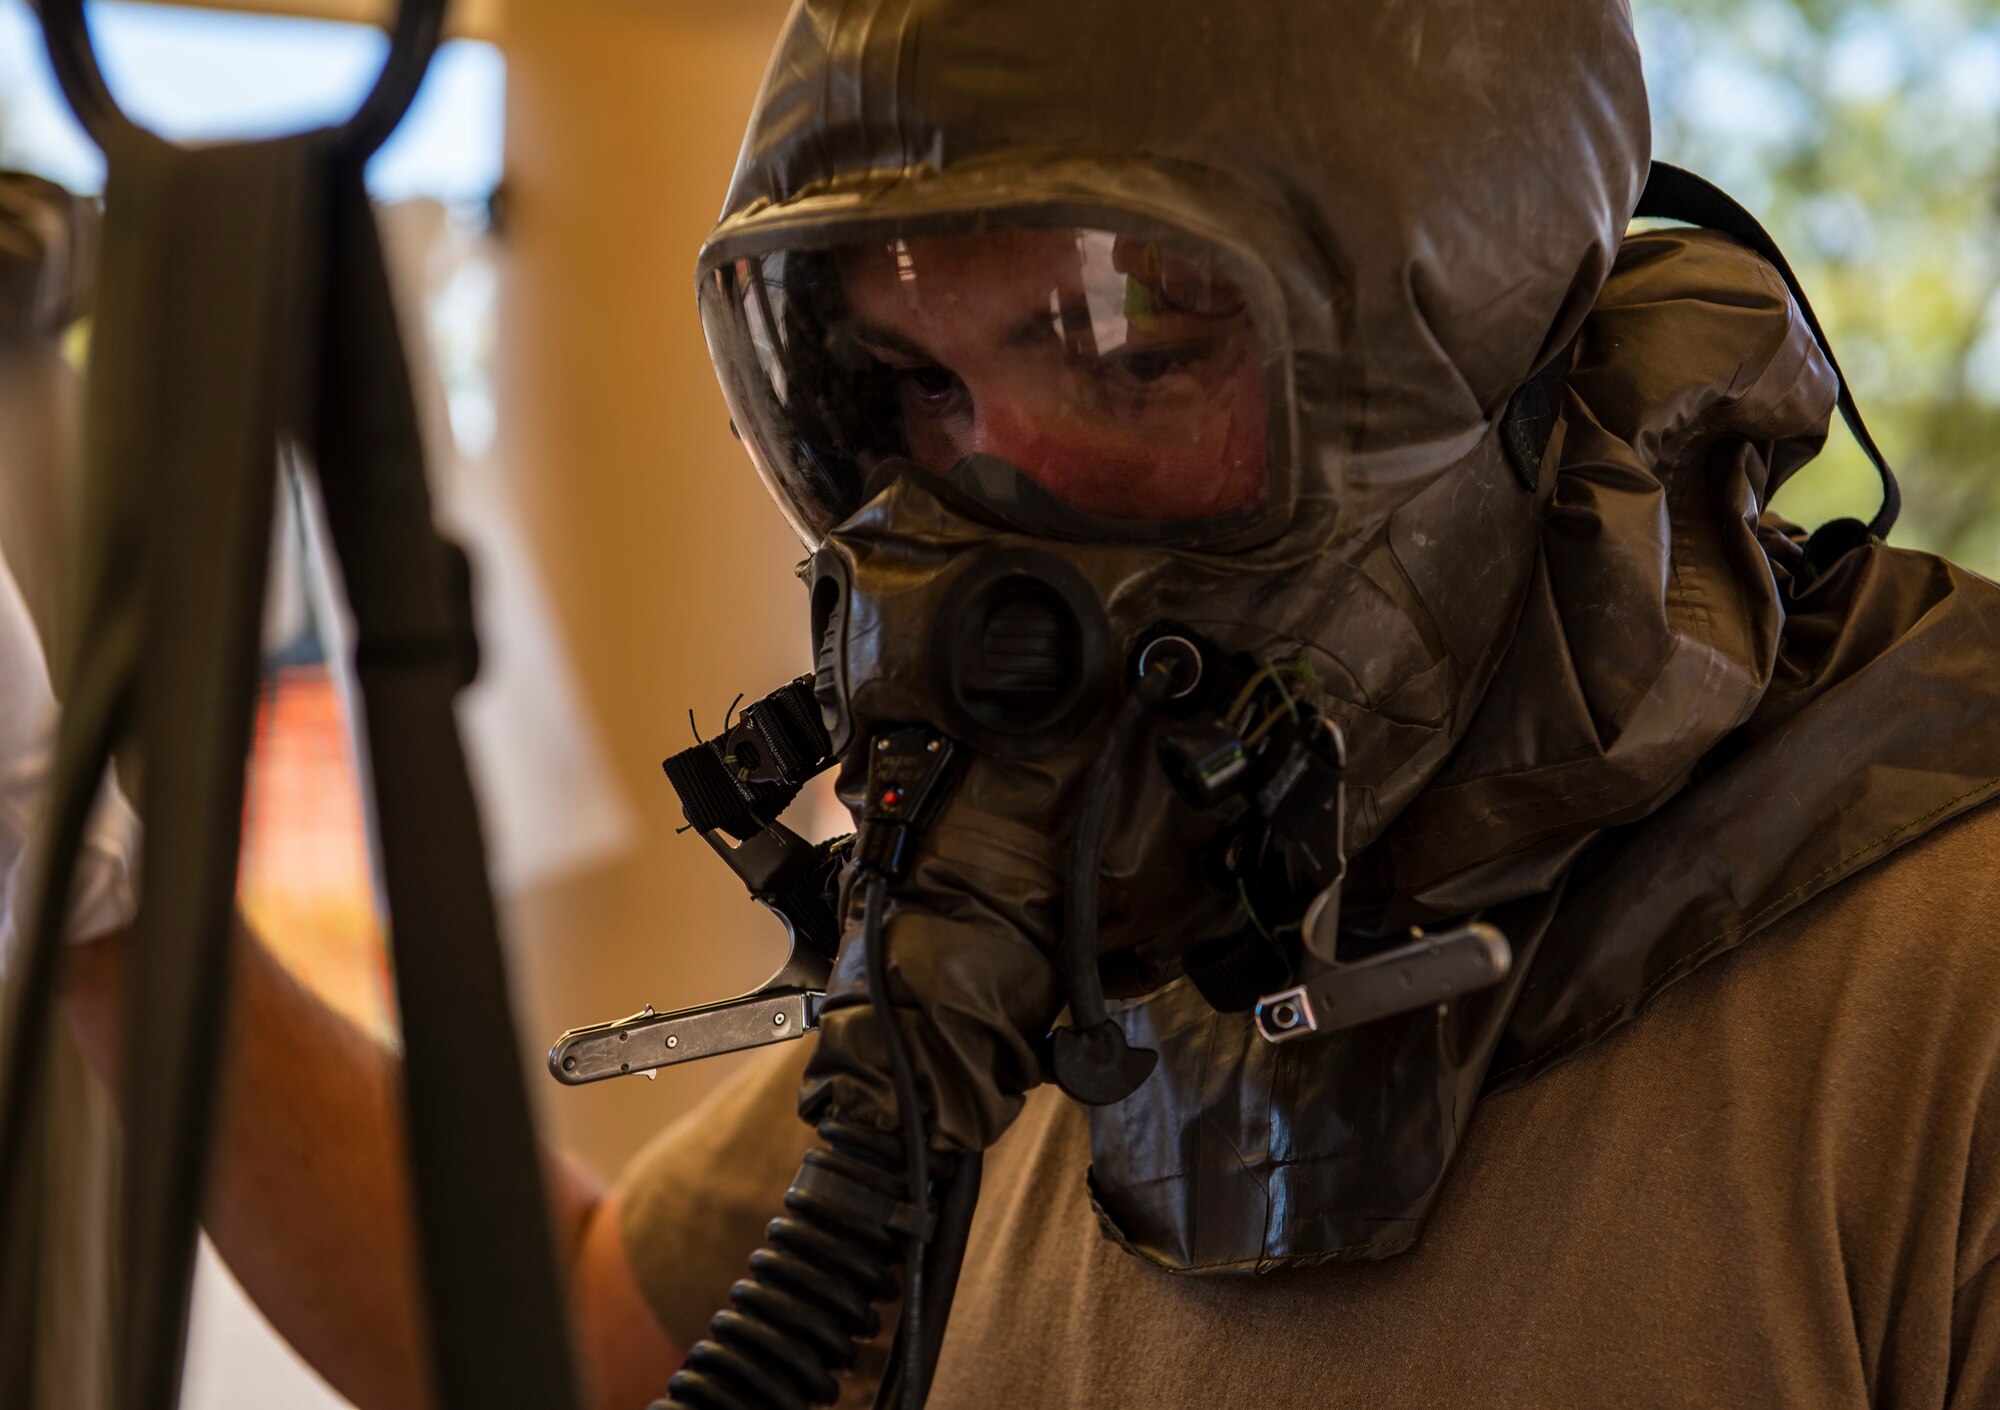 Staff Sgt. Sean Zeringue, 39th Airlift Squadron loadmaster, goes through a decontamination line at Dyess Air Force Base, Texas, Nov. 17, 2020.